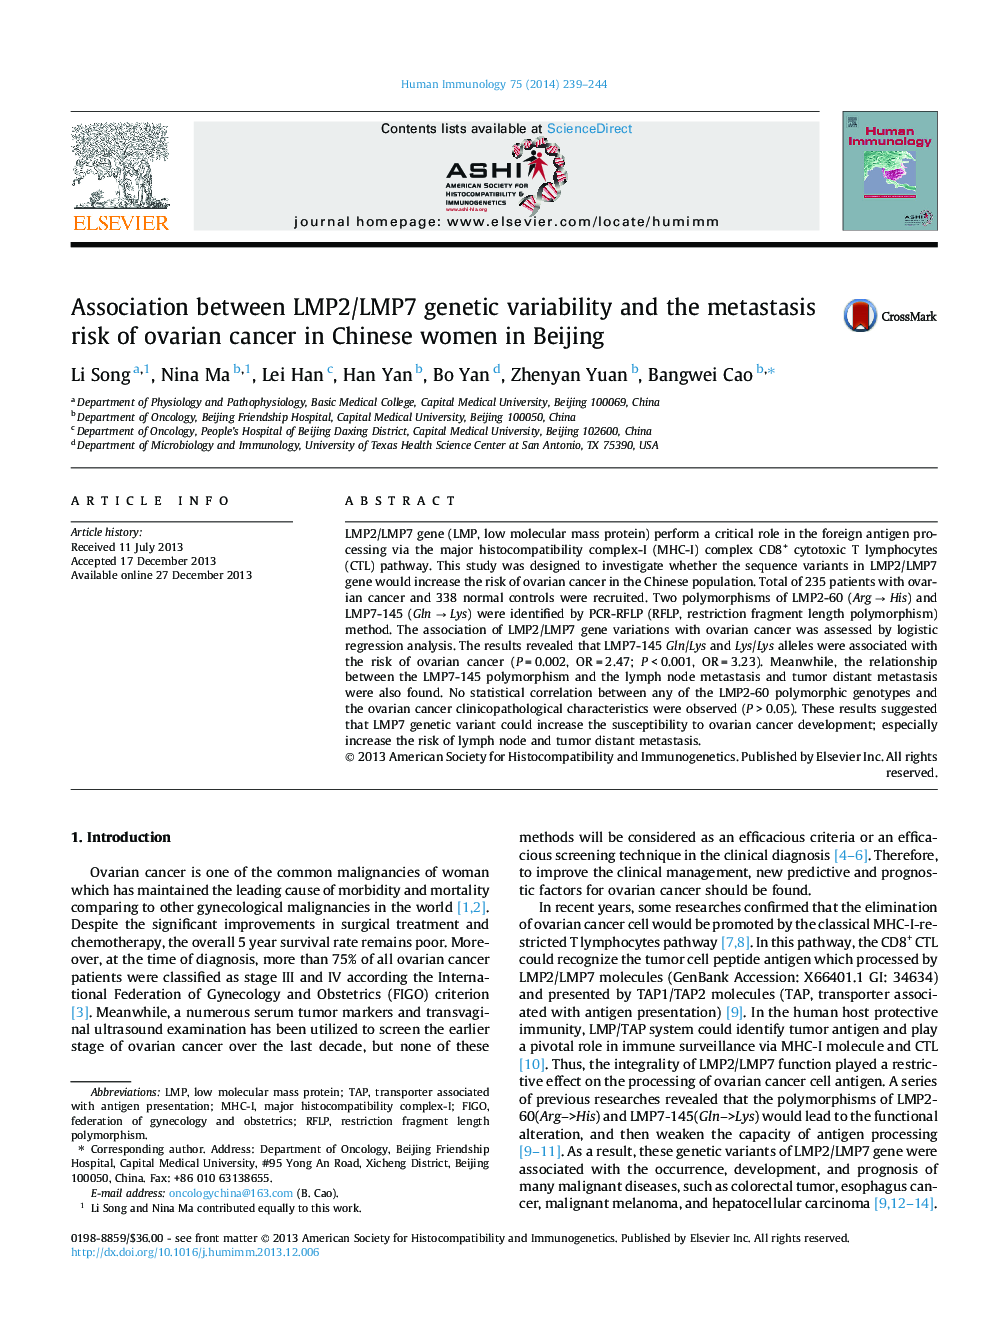 Association between LMP2/LMP7 genetic variability and the metastasis risk of ovarian cancer in Chinese women in Beijing